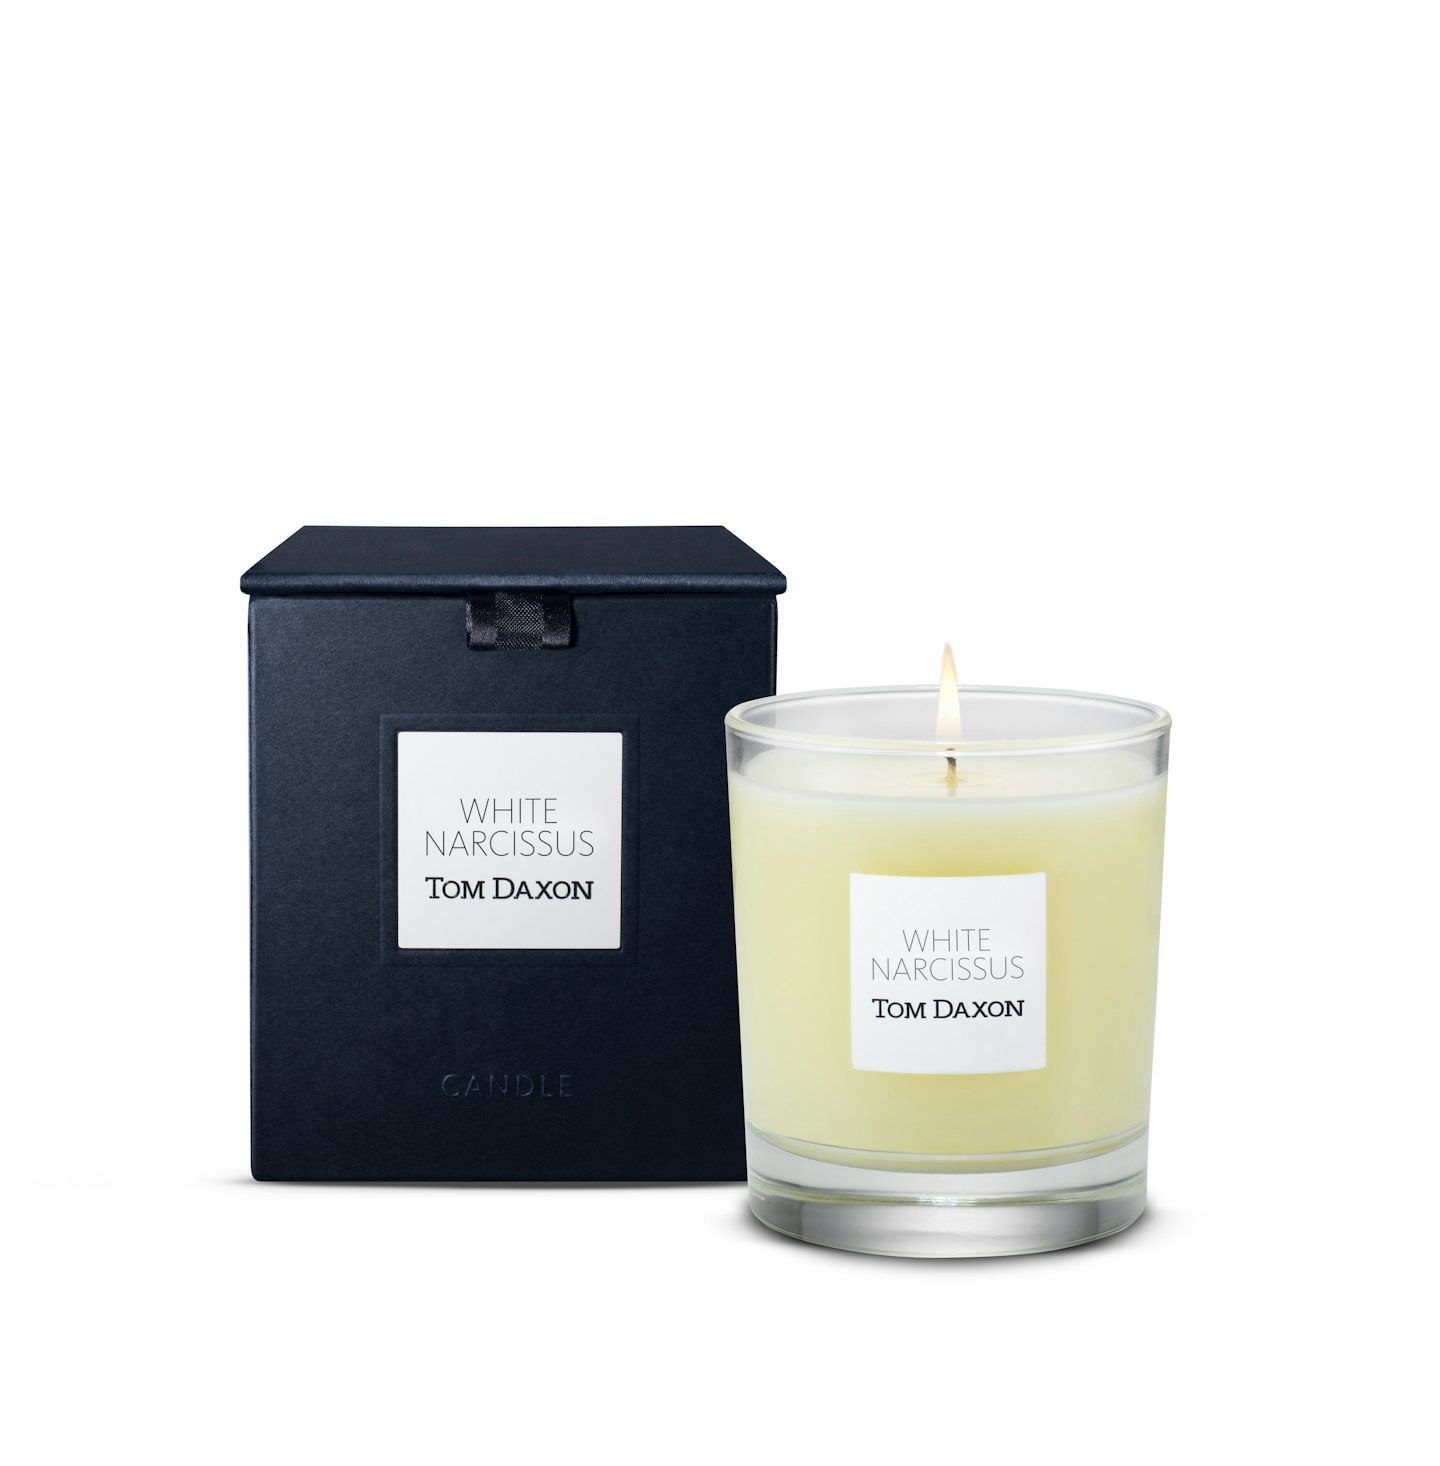 Tom Daxon, White Narcissus Candle, £25